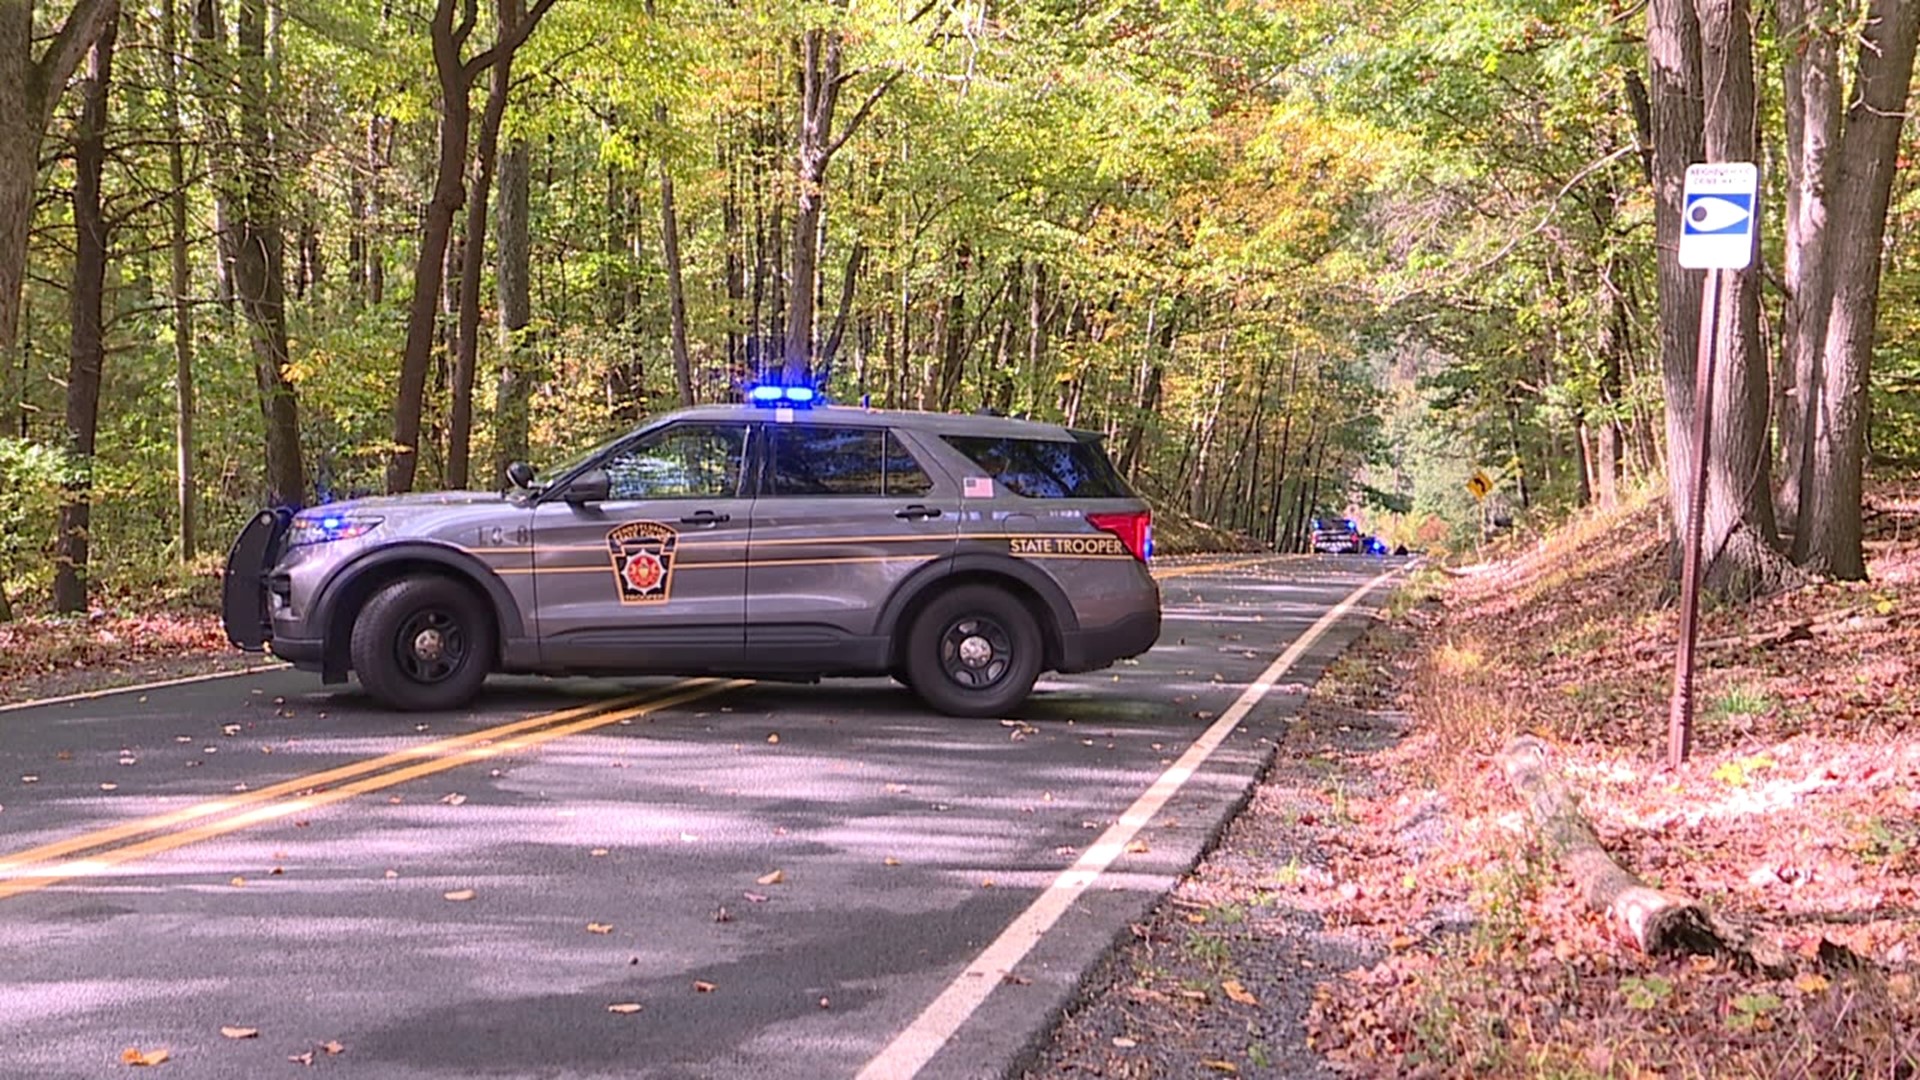 State police are investigating the deaths of two people in Schuylkill County after their bodies were found in a wooded area in New Philadelphia.